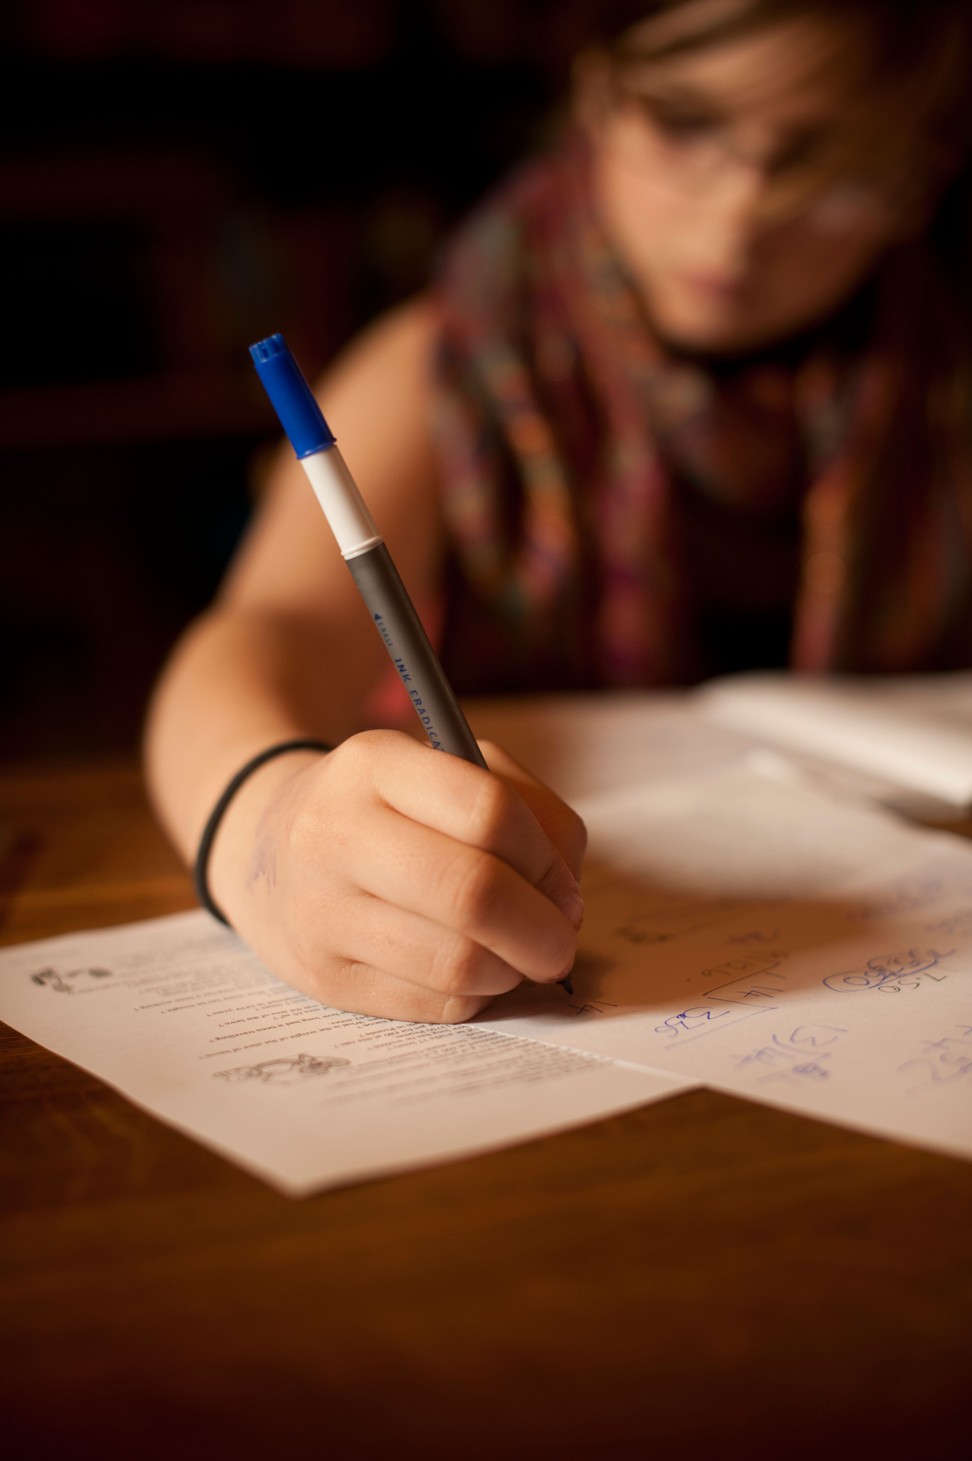 C43720 A 12 13 year old girl doing her mathematics homework at home Photo: Alamy